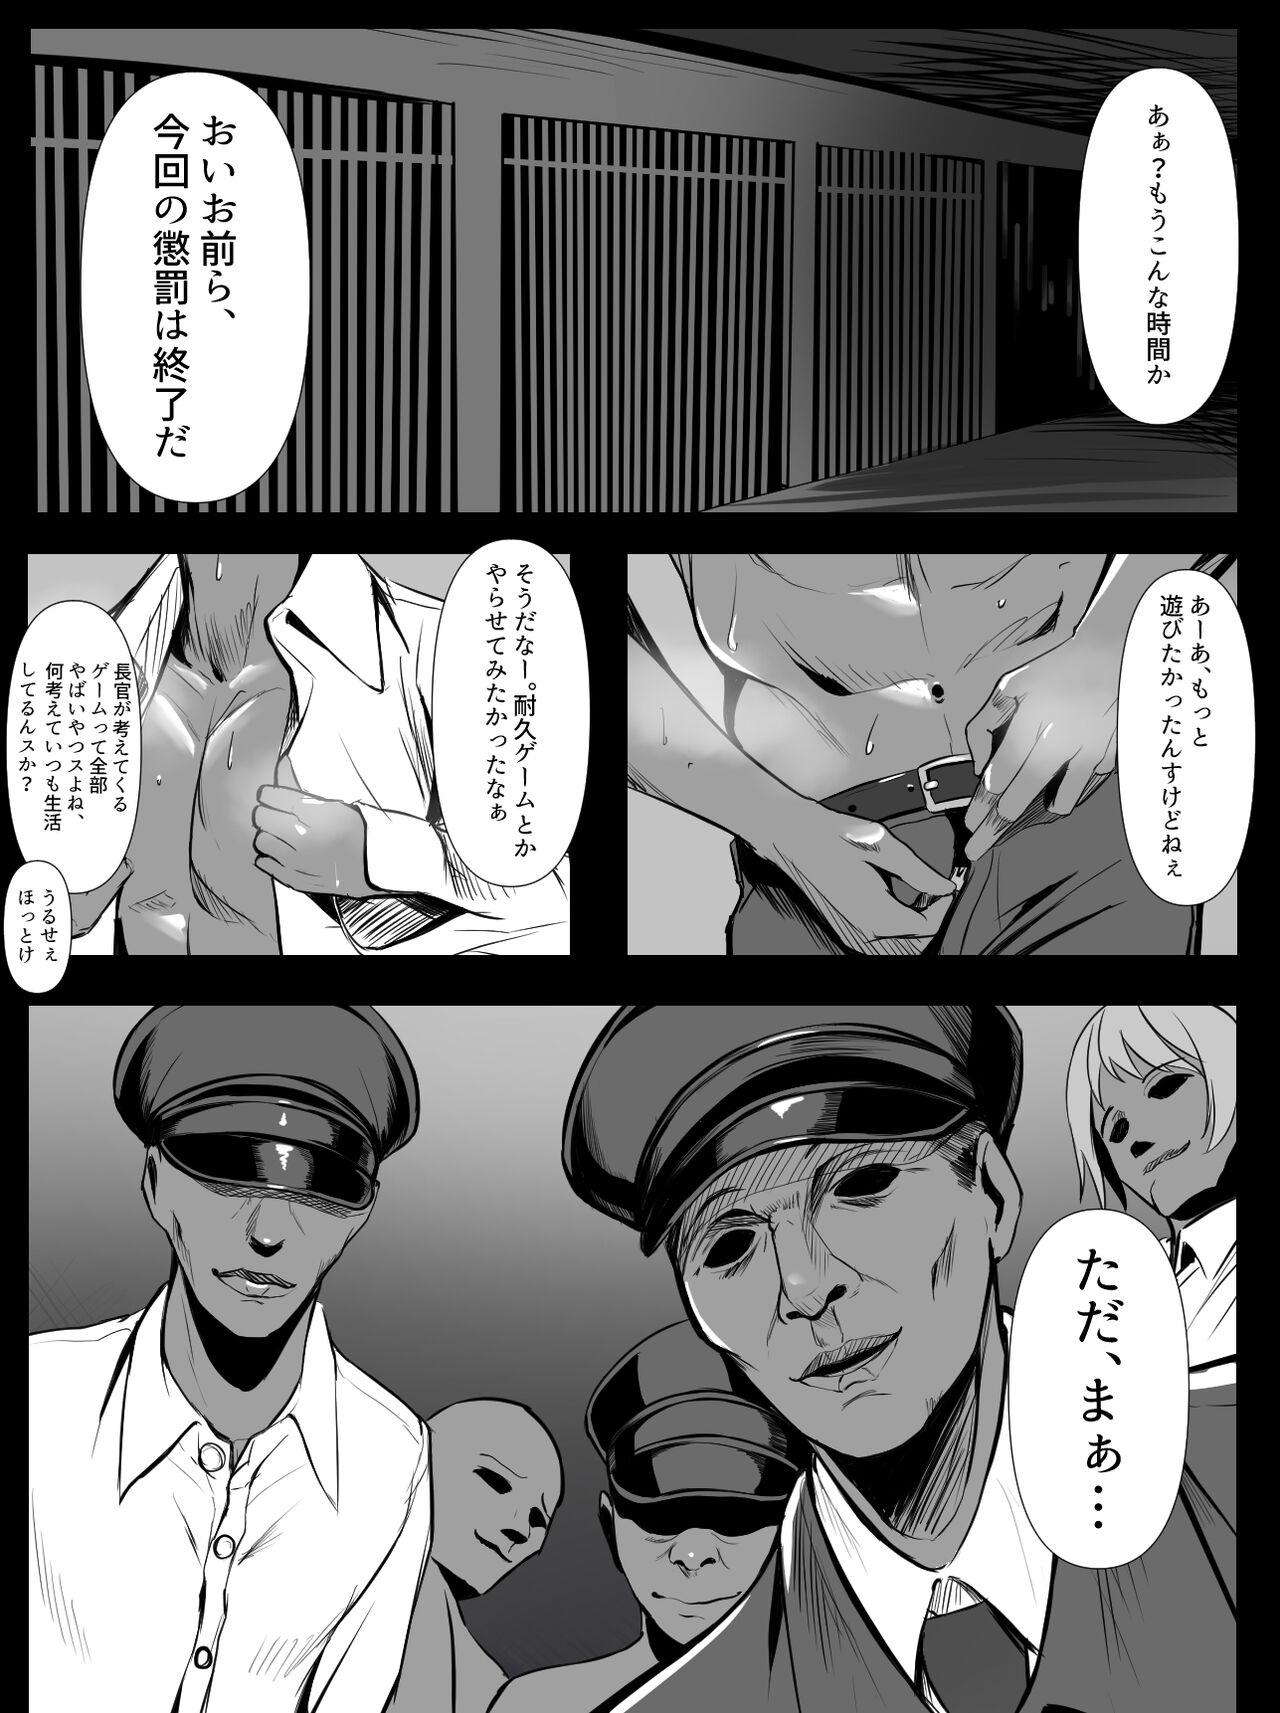 Tgirl 10月支援者様イラスト - The idolmaster Trimmed - Page 7